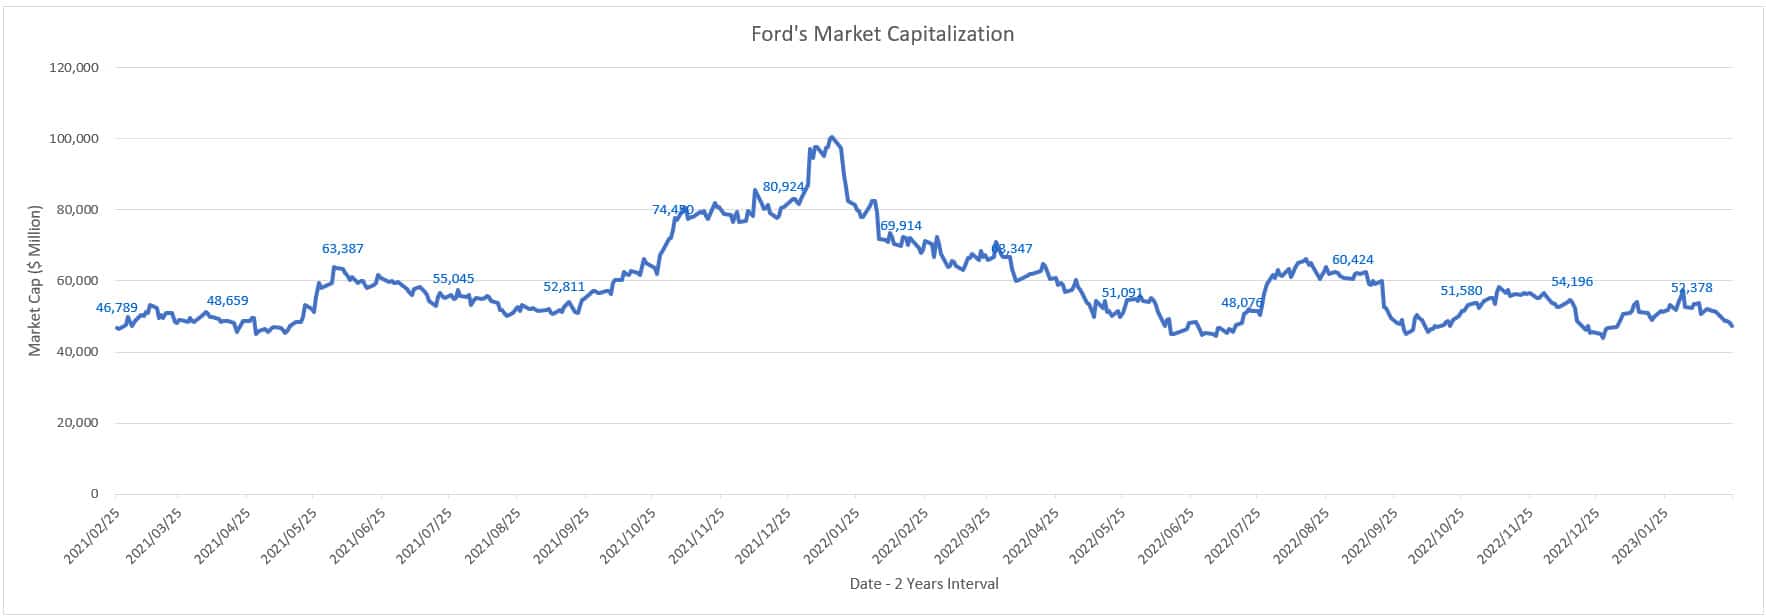 Ford's market capitalization